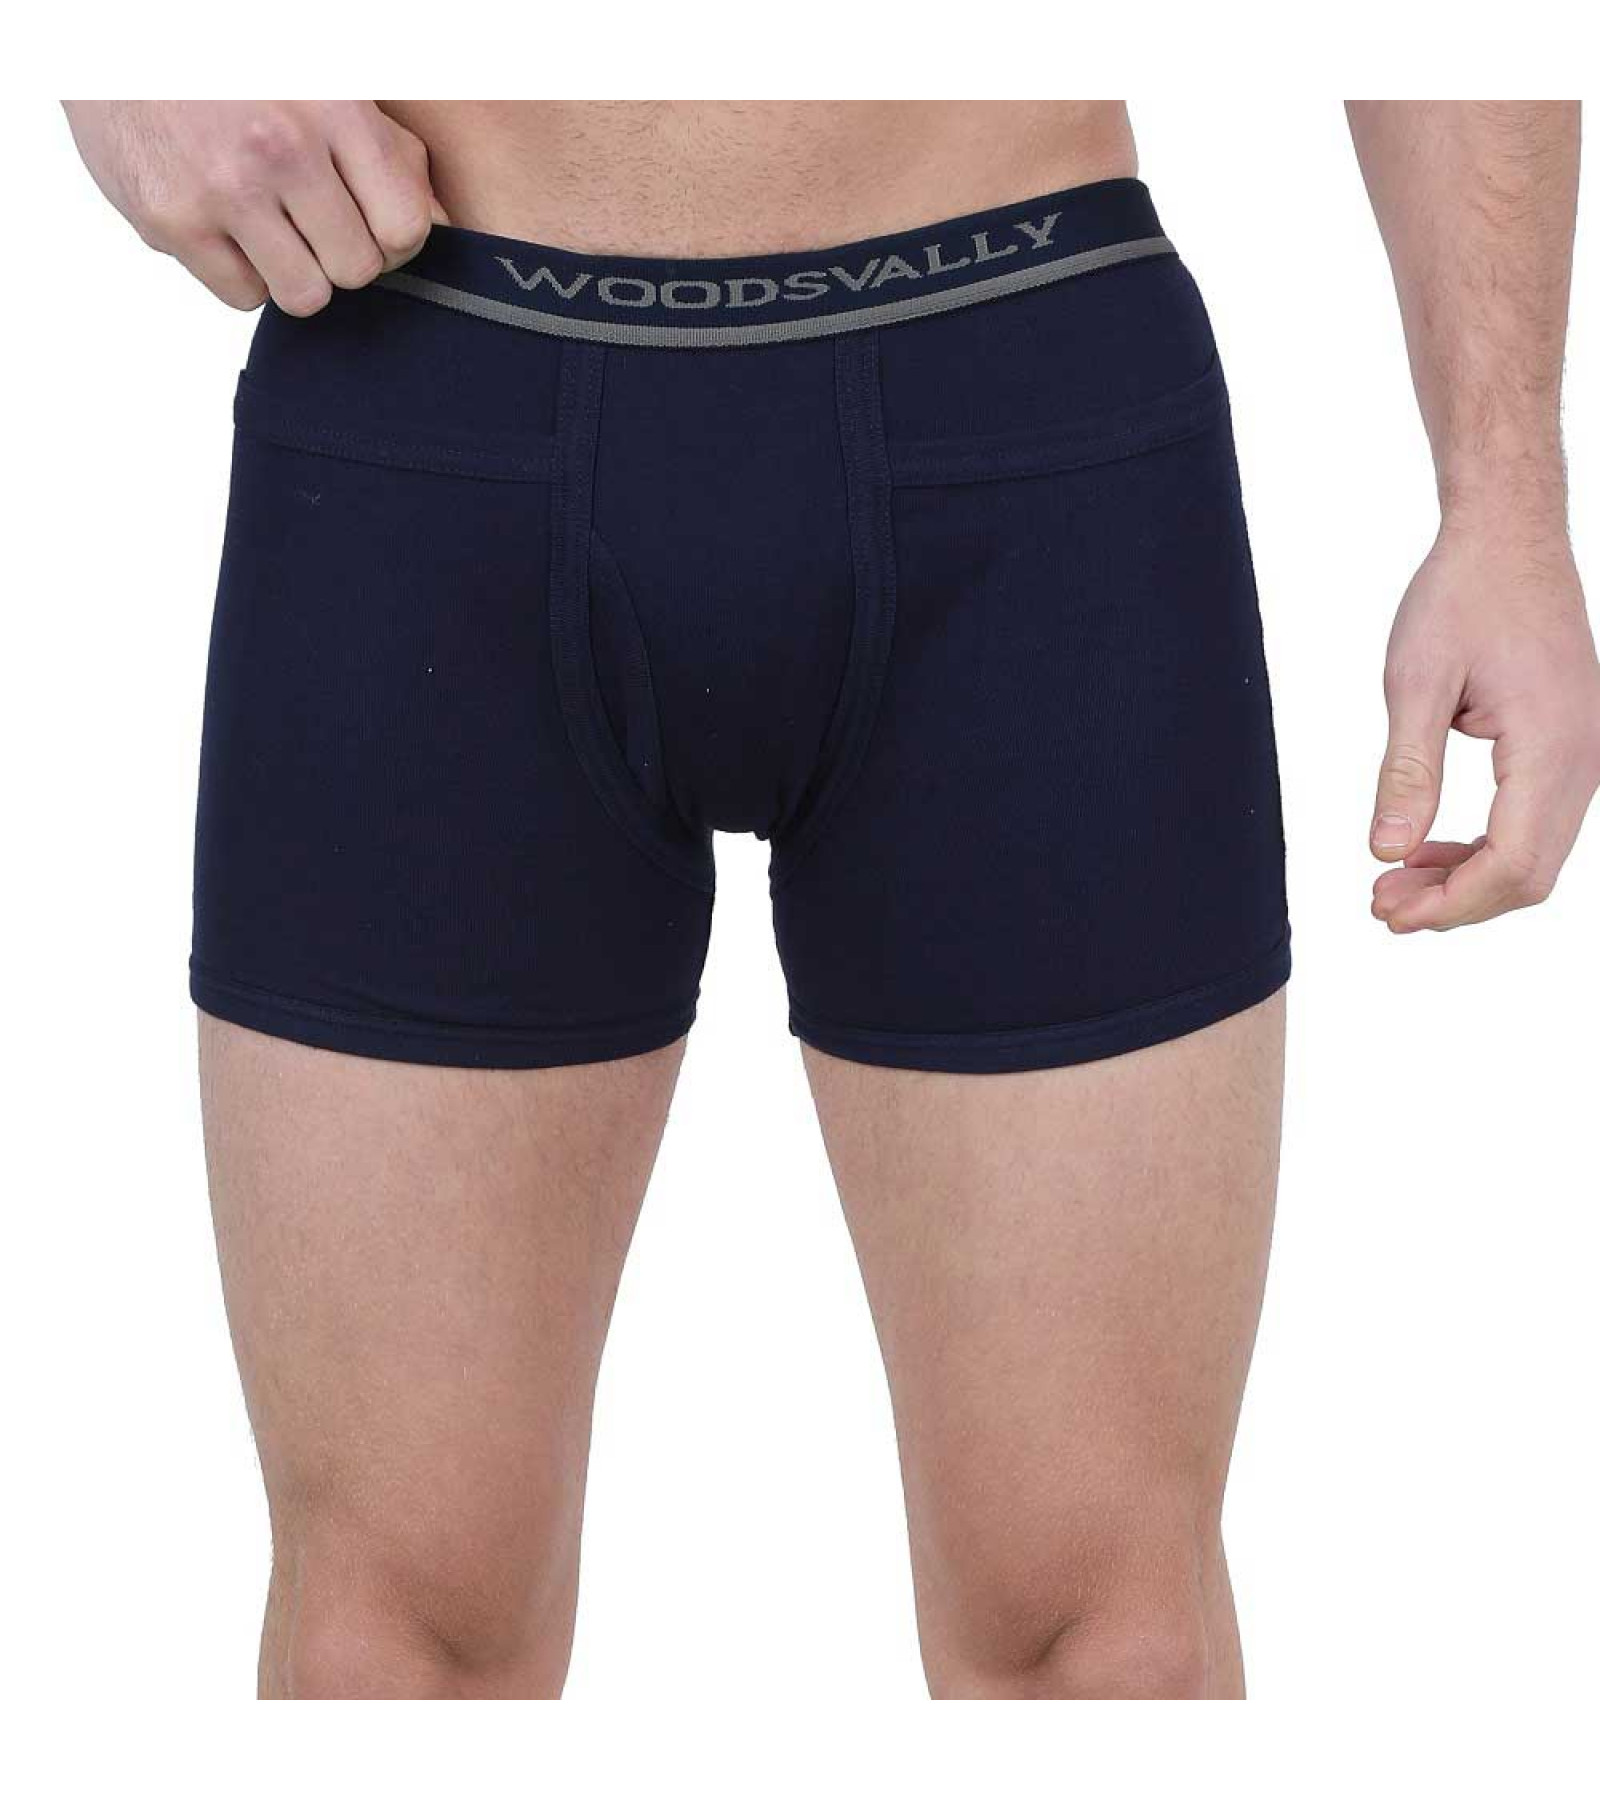 Men's Cotton Trunk with Pockets